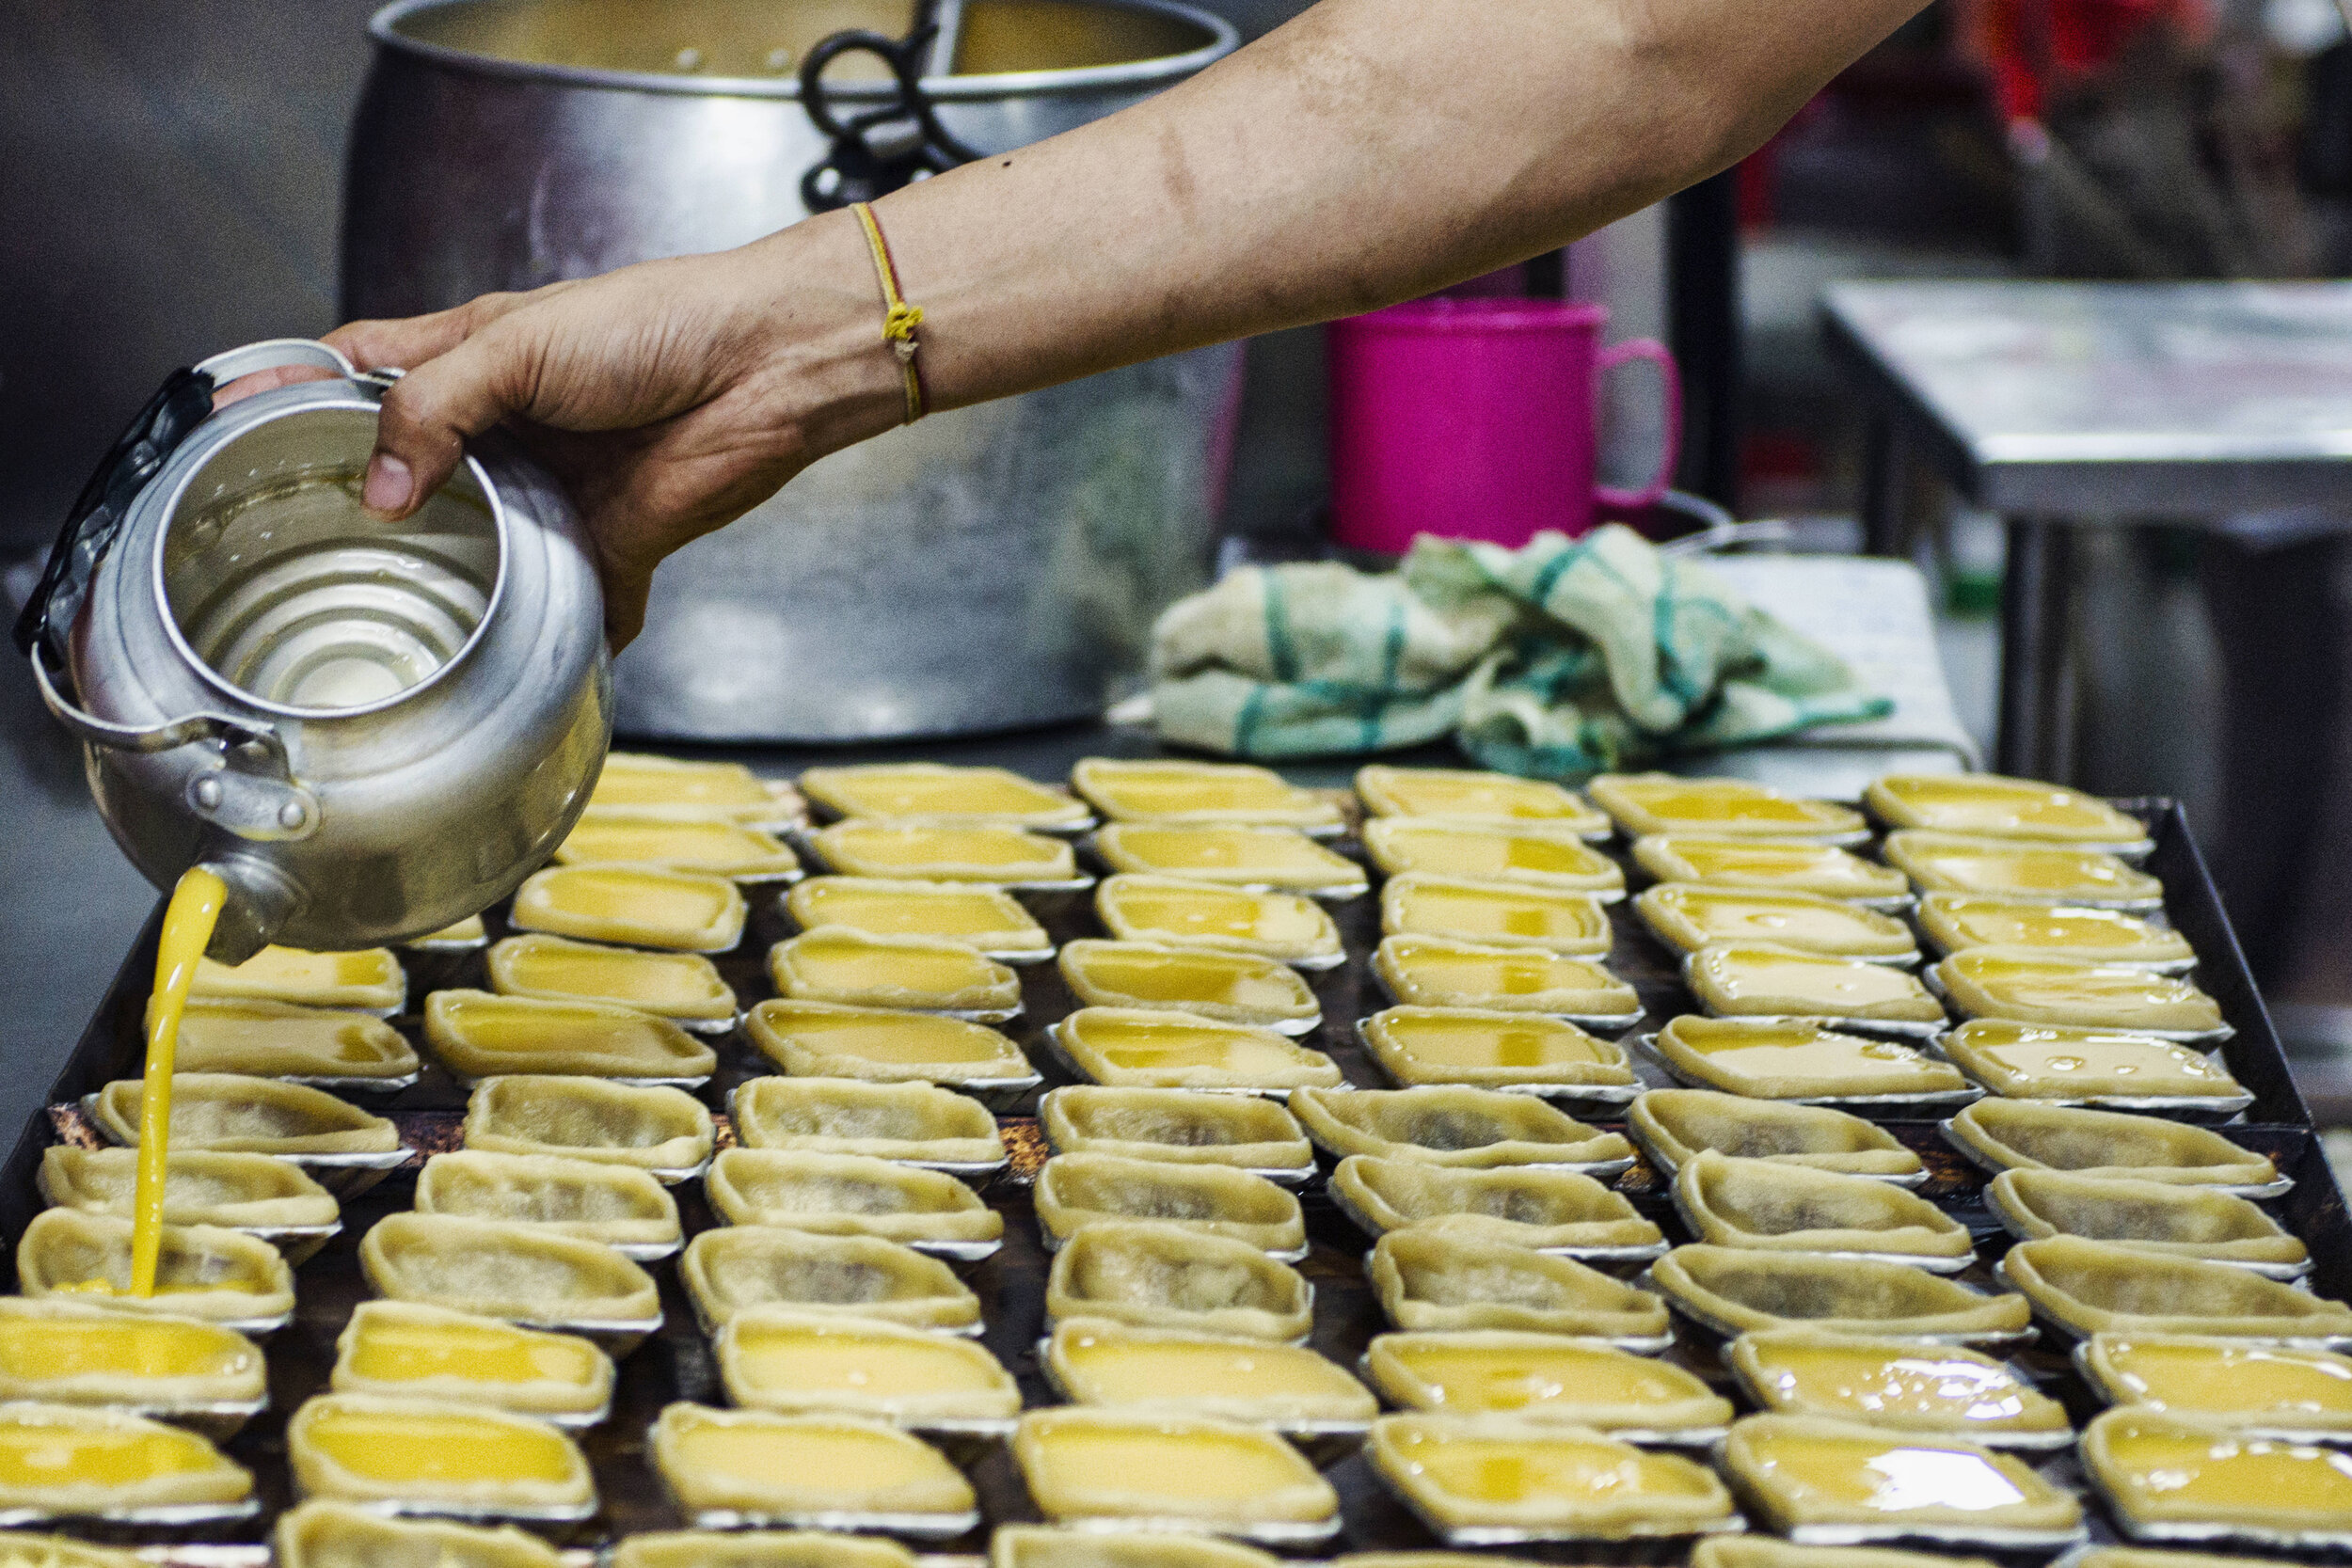  An employee pours custard filling into tart cases before baking egg tarts at the traditional Cantonese confectionery Tong Heng in Singapore April 21, 2018. 